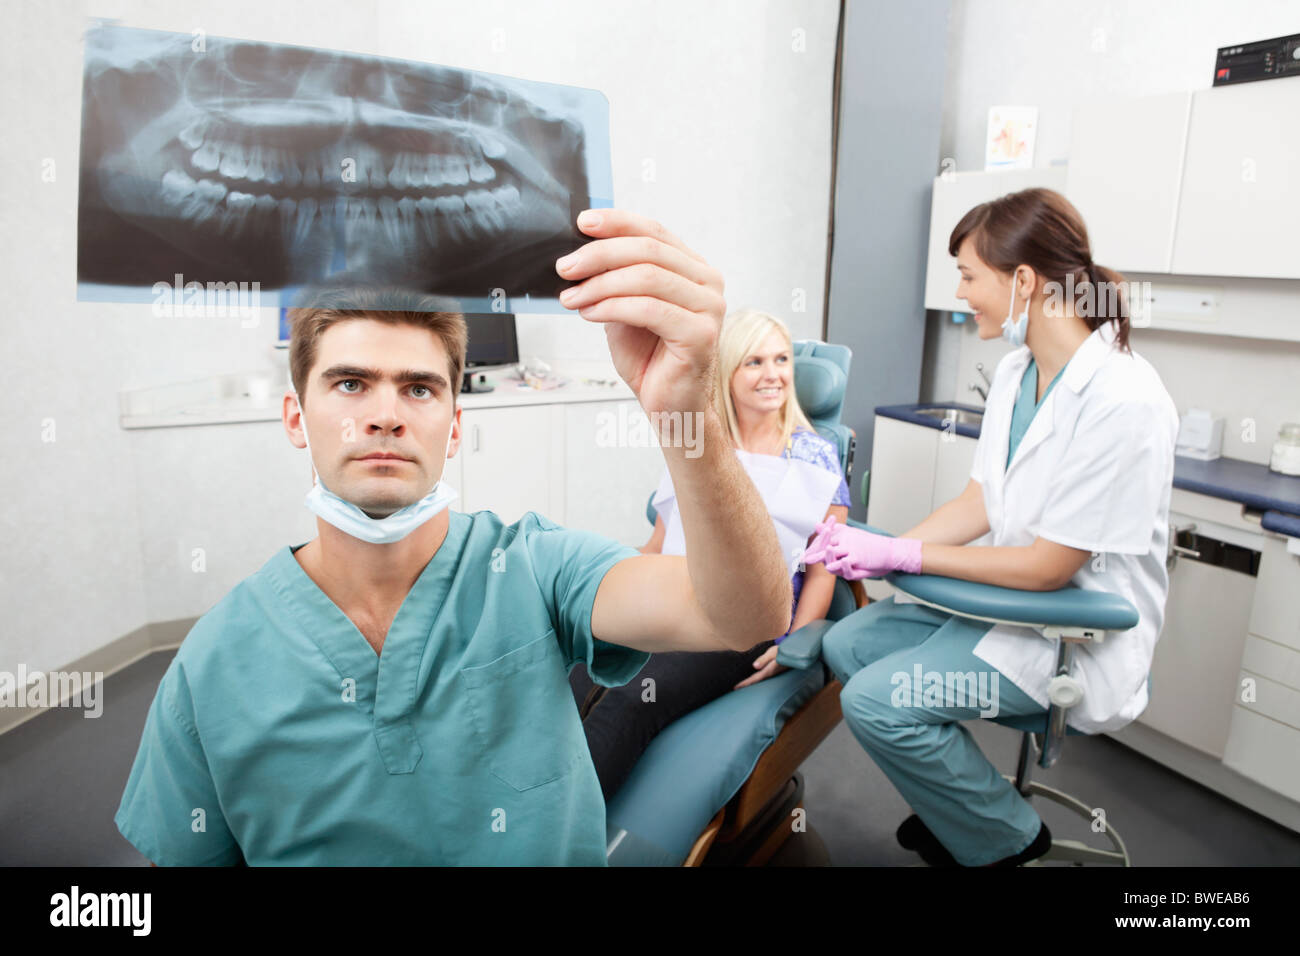 Radiodentist checking x-ray with assistant and patient having conversation in the background Stock Photo